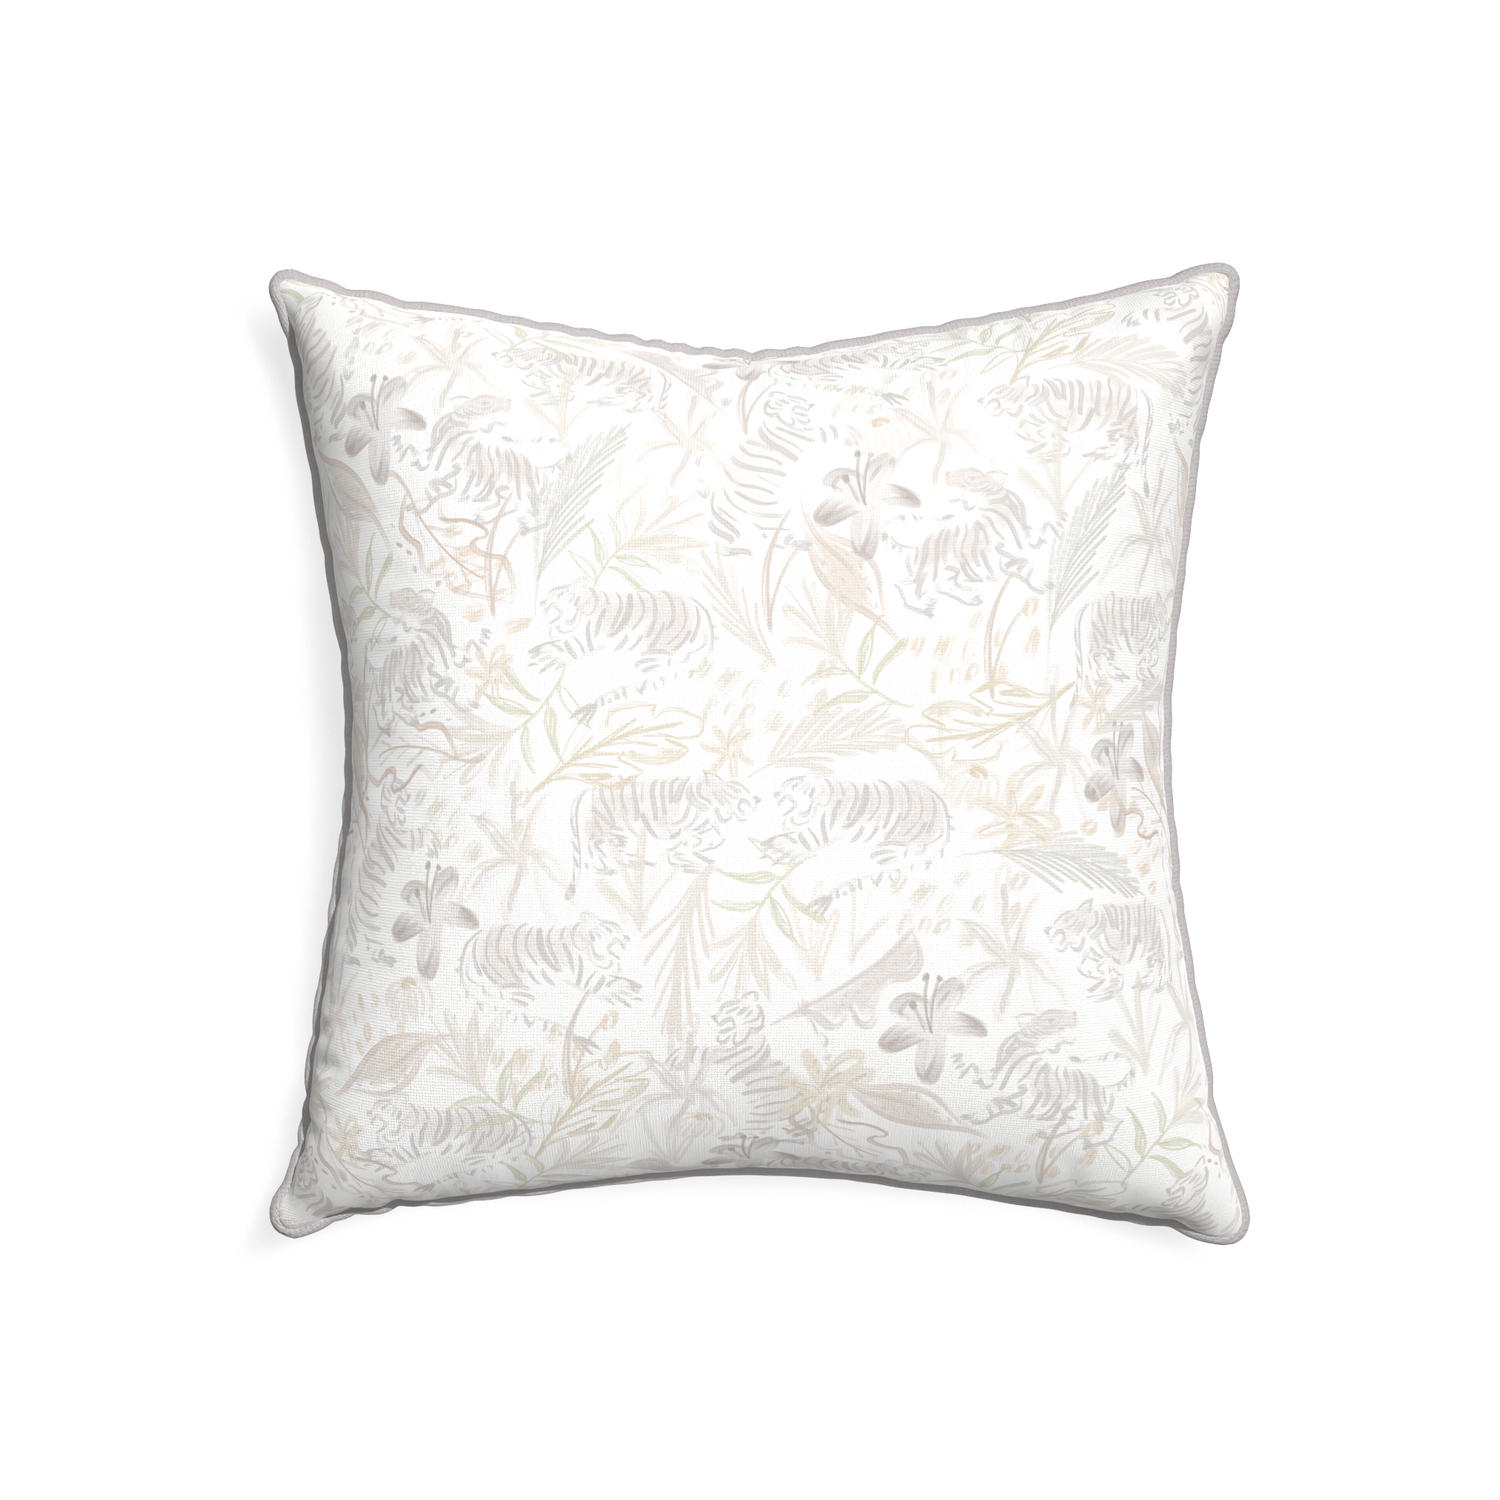 22-square frida sand custom beige chinoiserie tigerpillow with pebble piping on white background